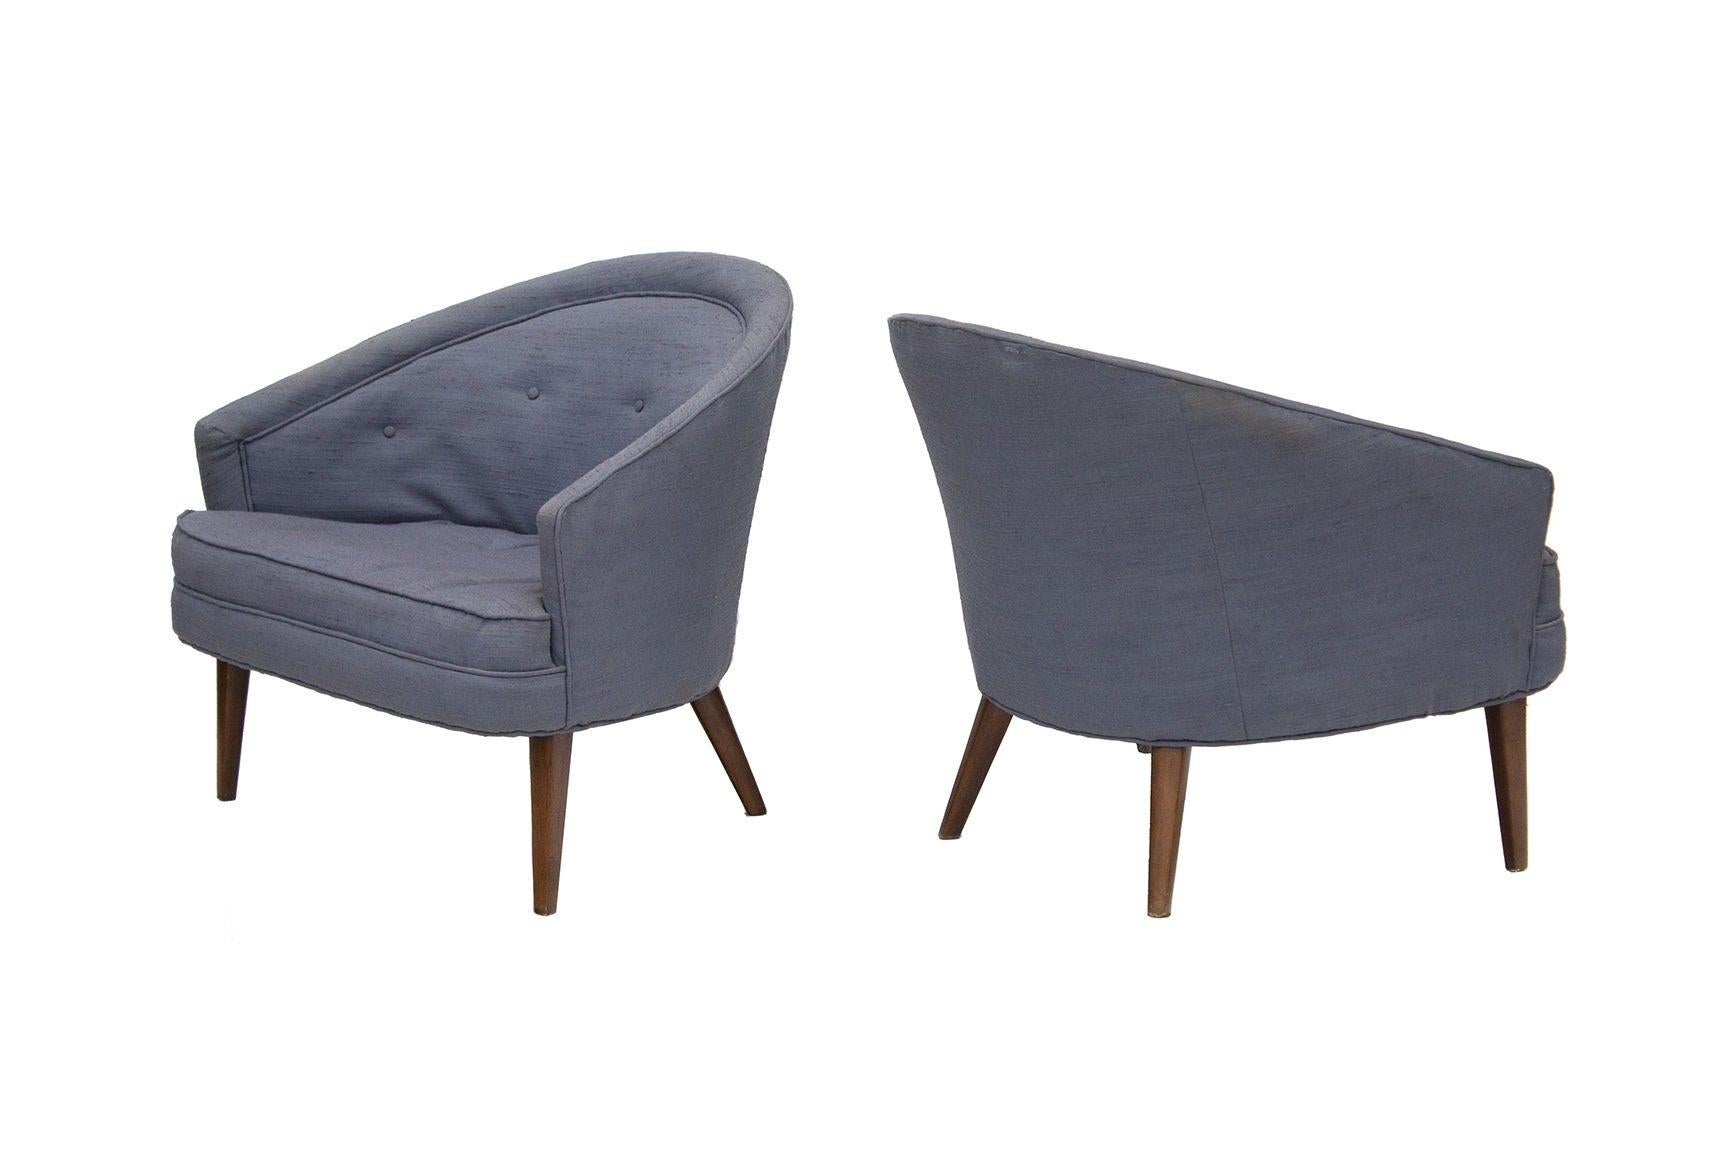 Mid-20th Century Petite Pair of Tufted Mid-Century Armchairs For Sale